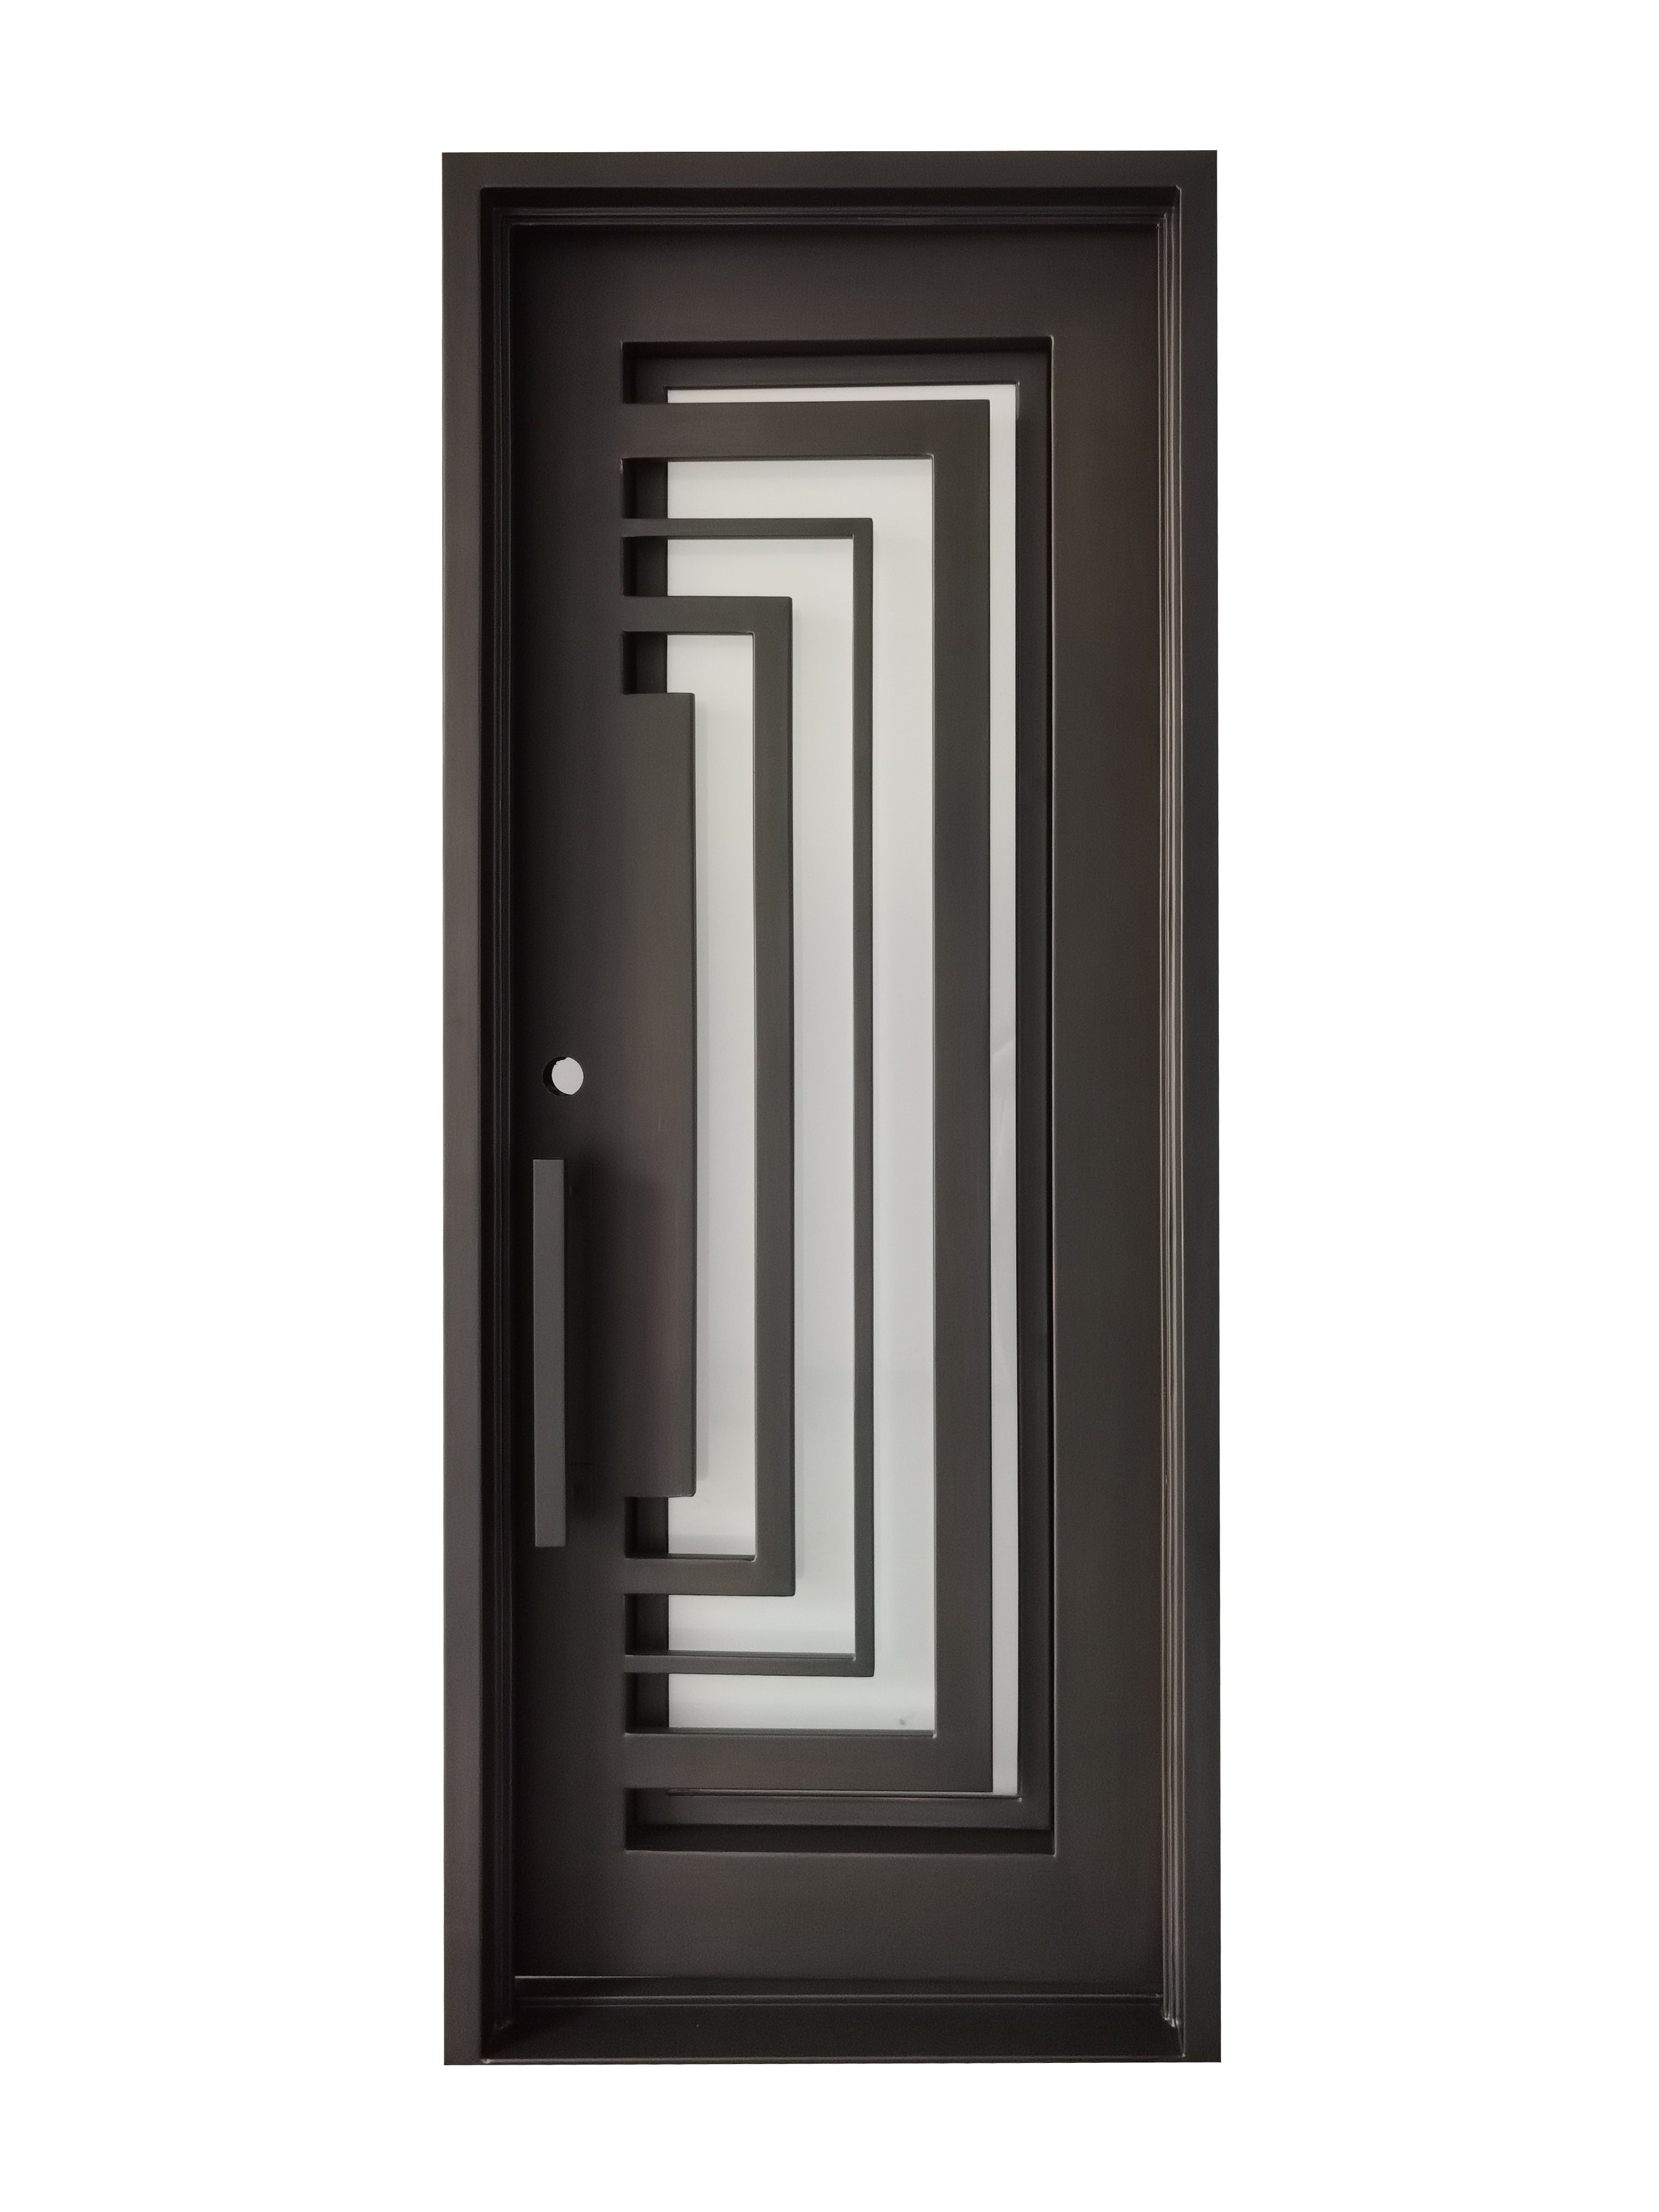 Bellaire Model Pre Hung Single Front Entry Wrought Iron Door With Frosted Glass Dark Bronze Finish